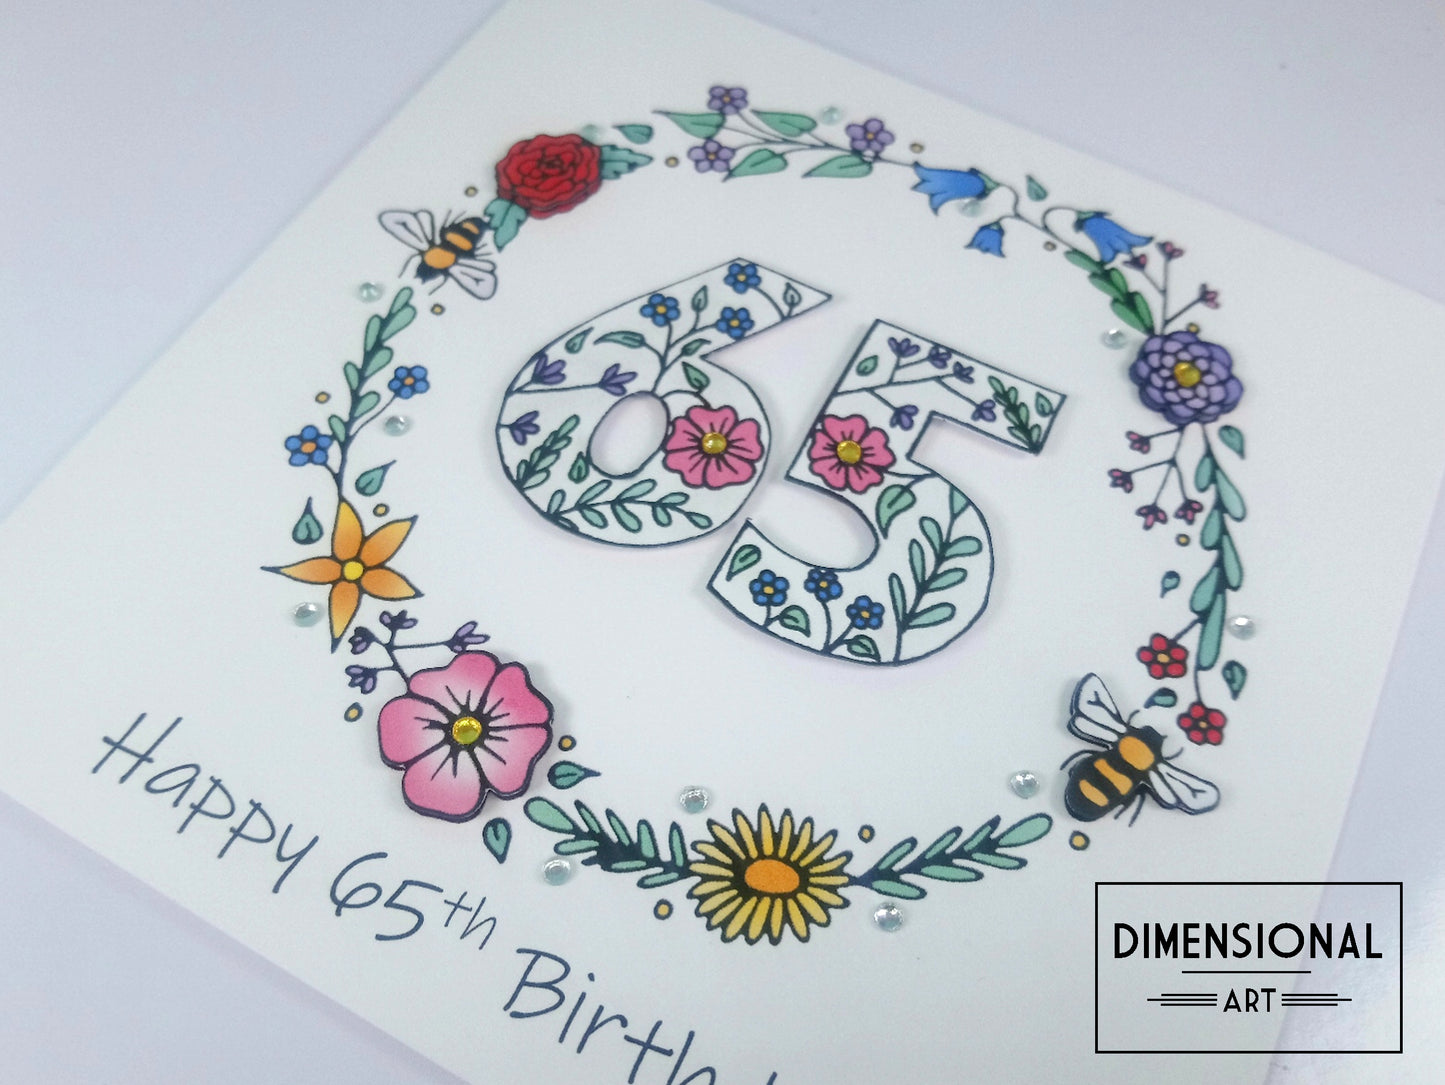 65th Flowers and Bees Birthday Card